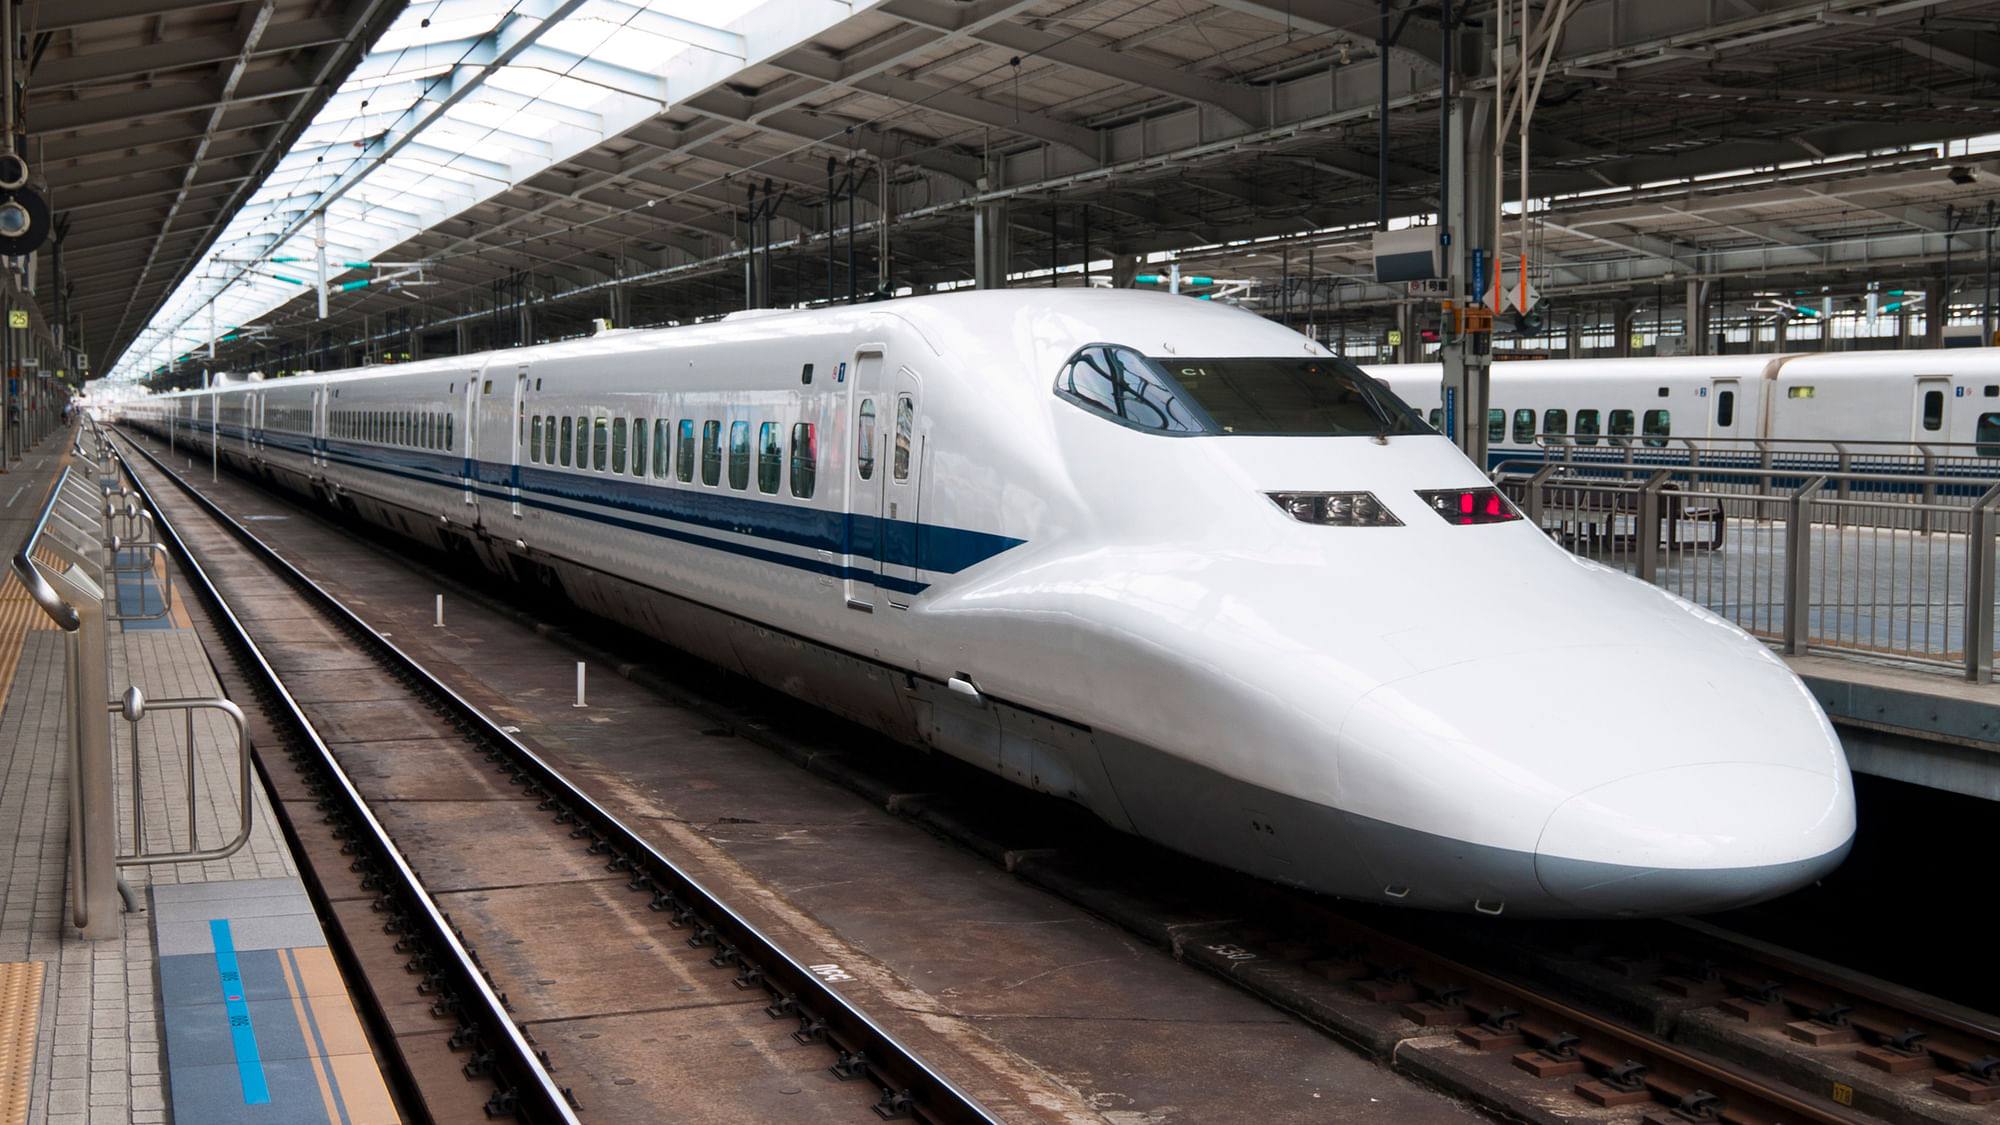 The high speed bullet train will be a cost-effective alternative for travellers. (Photo: iStockphoto)